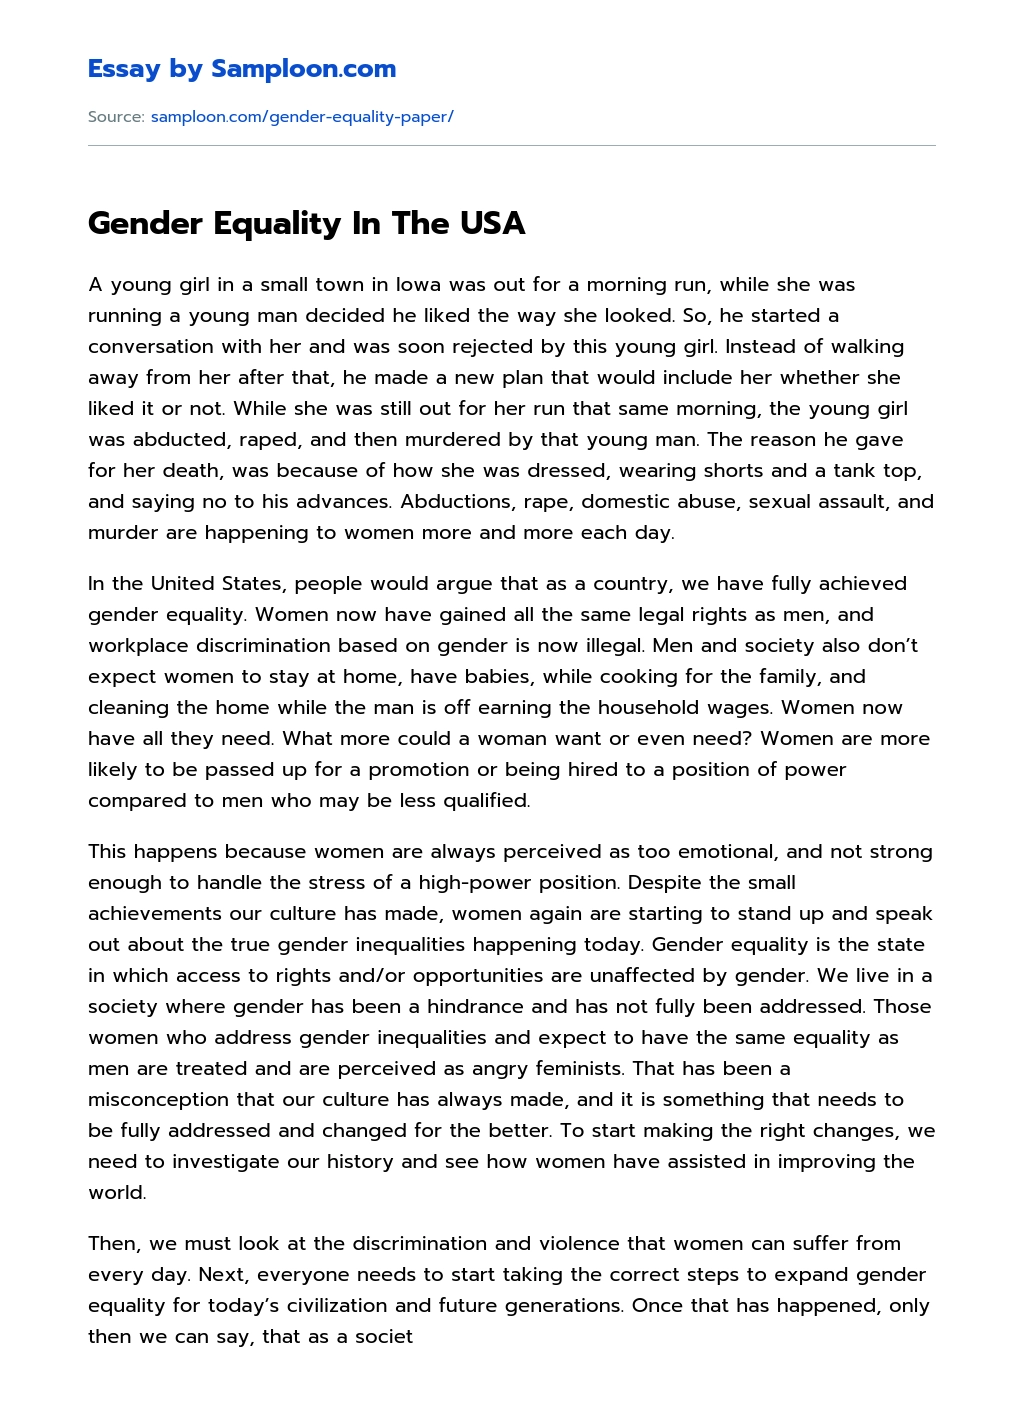 Gender Equality In The USA essay